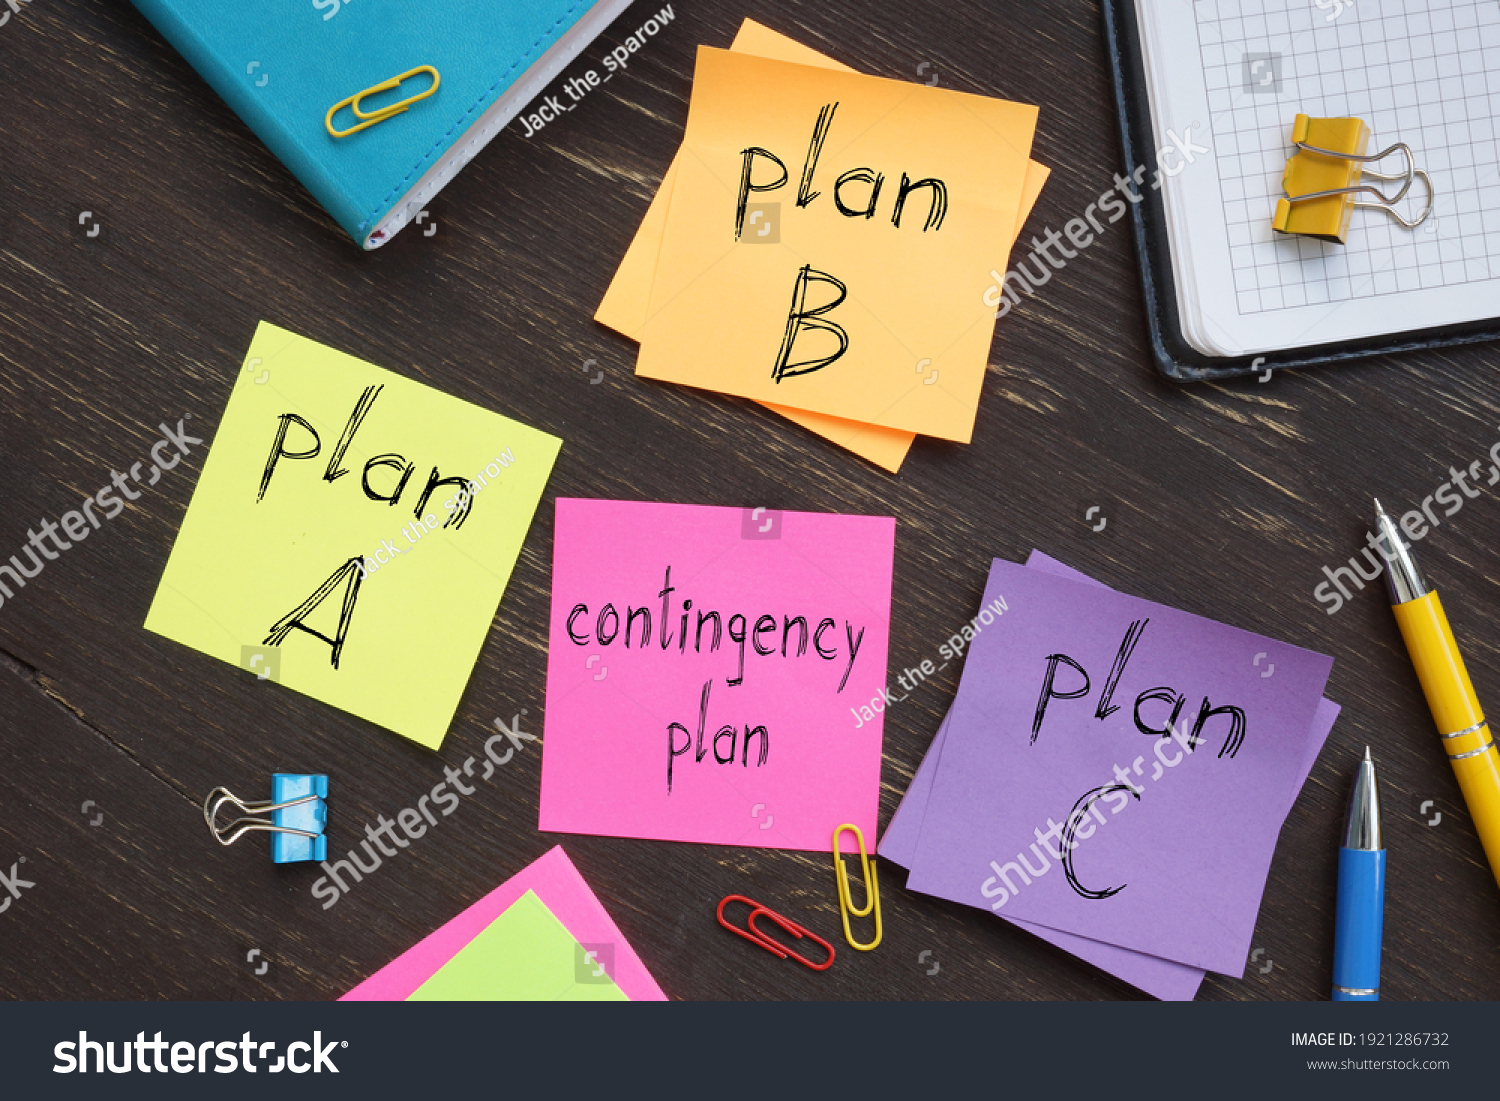 Contingency plan is shown on the conceptual photo using the text #1921286732